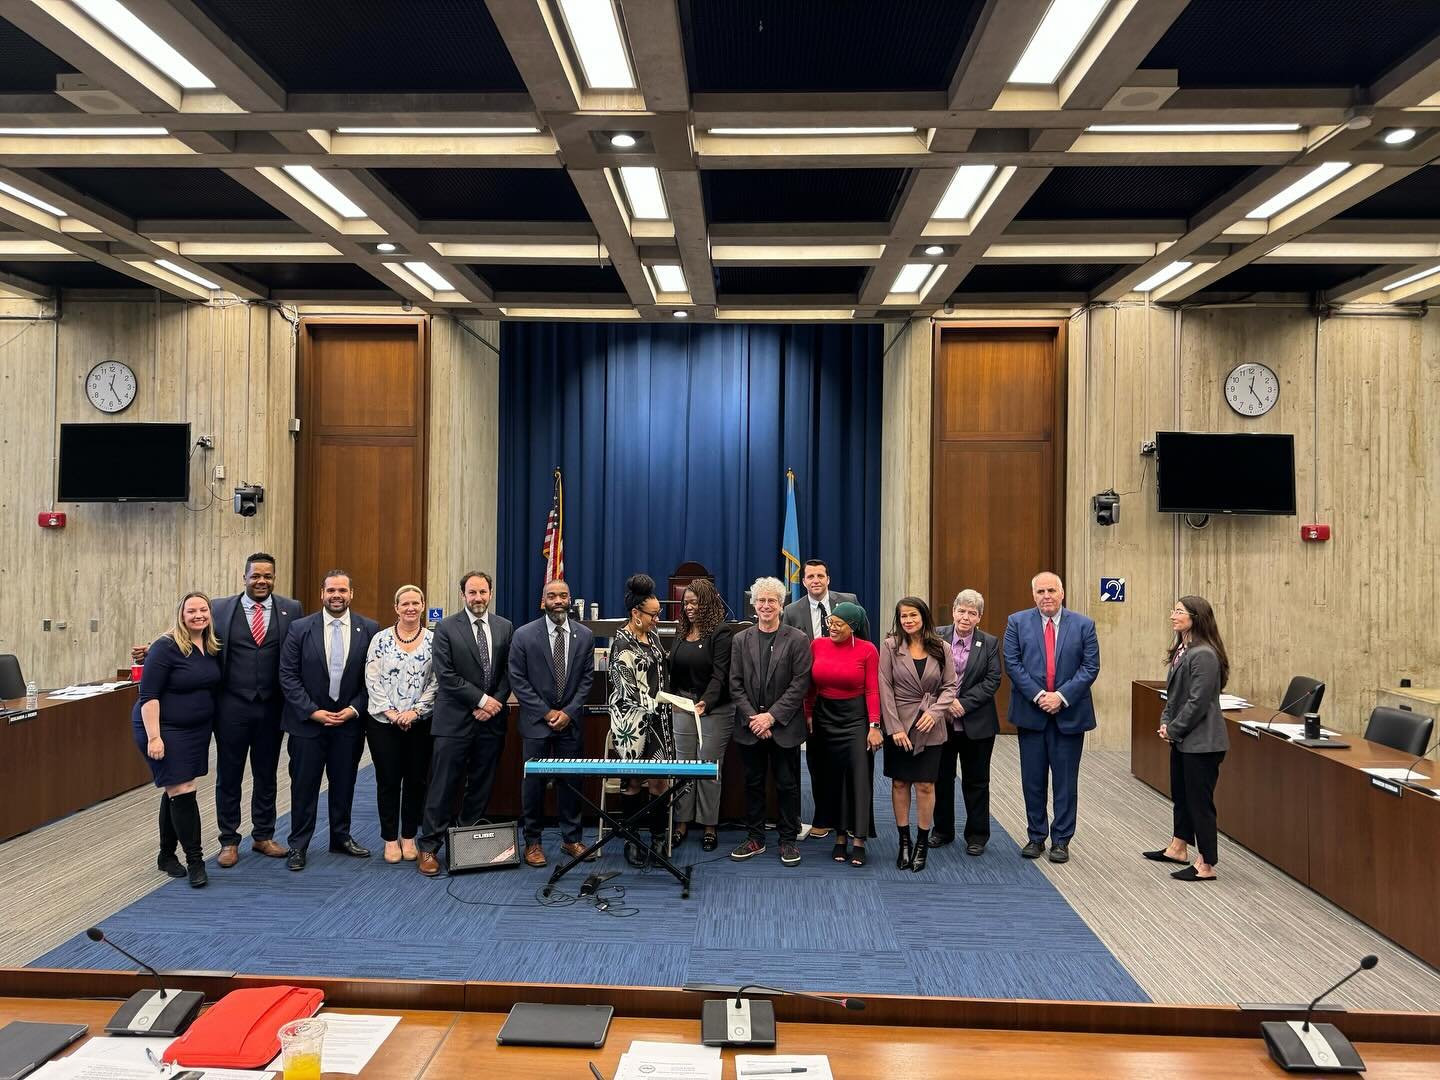 During last week&rsquo;s City Council meeting, April 30th was officially recognized as International Jazz Day, highlighting Boston&rsquo;s esteemed jazz heritage and dynamic cultural landscape.

We were fortunate to have the opportunity to hear from 